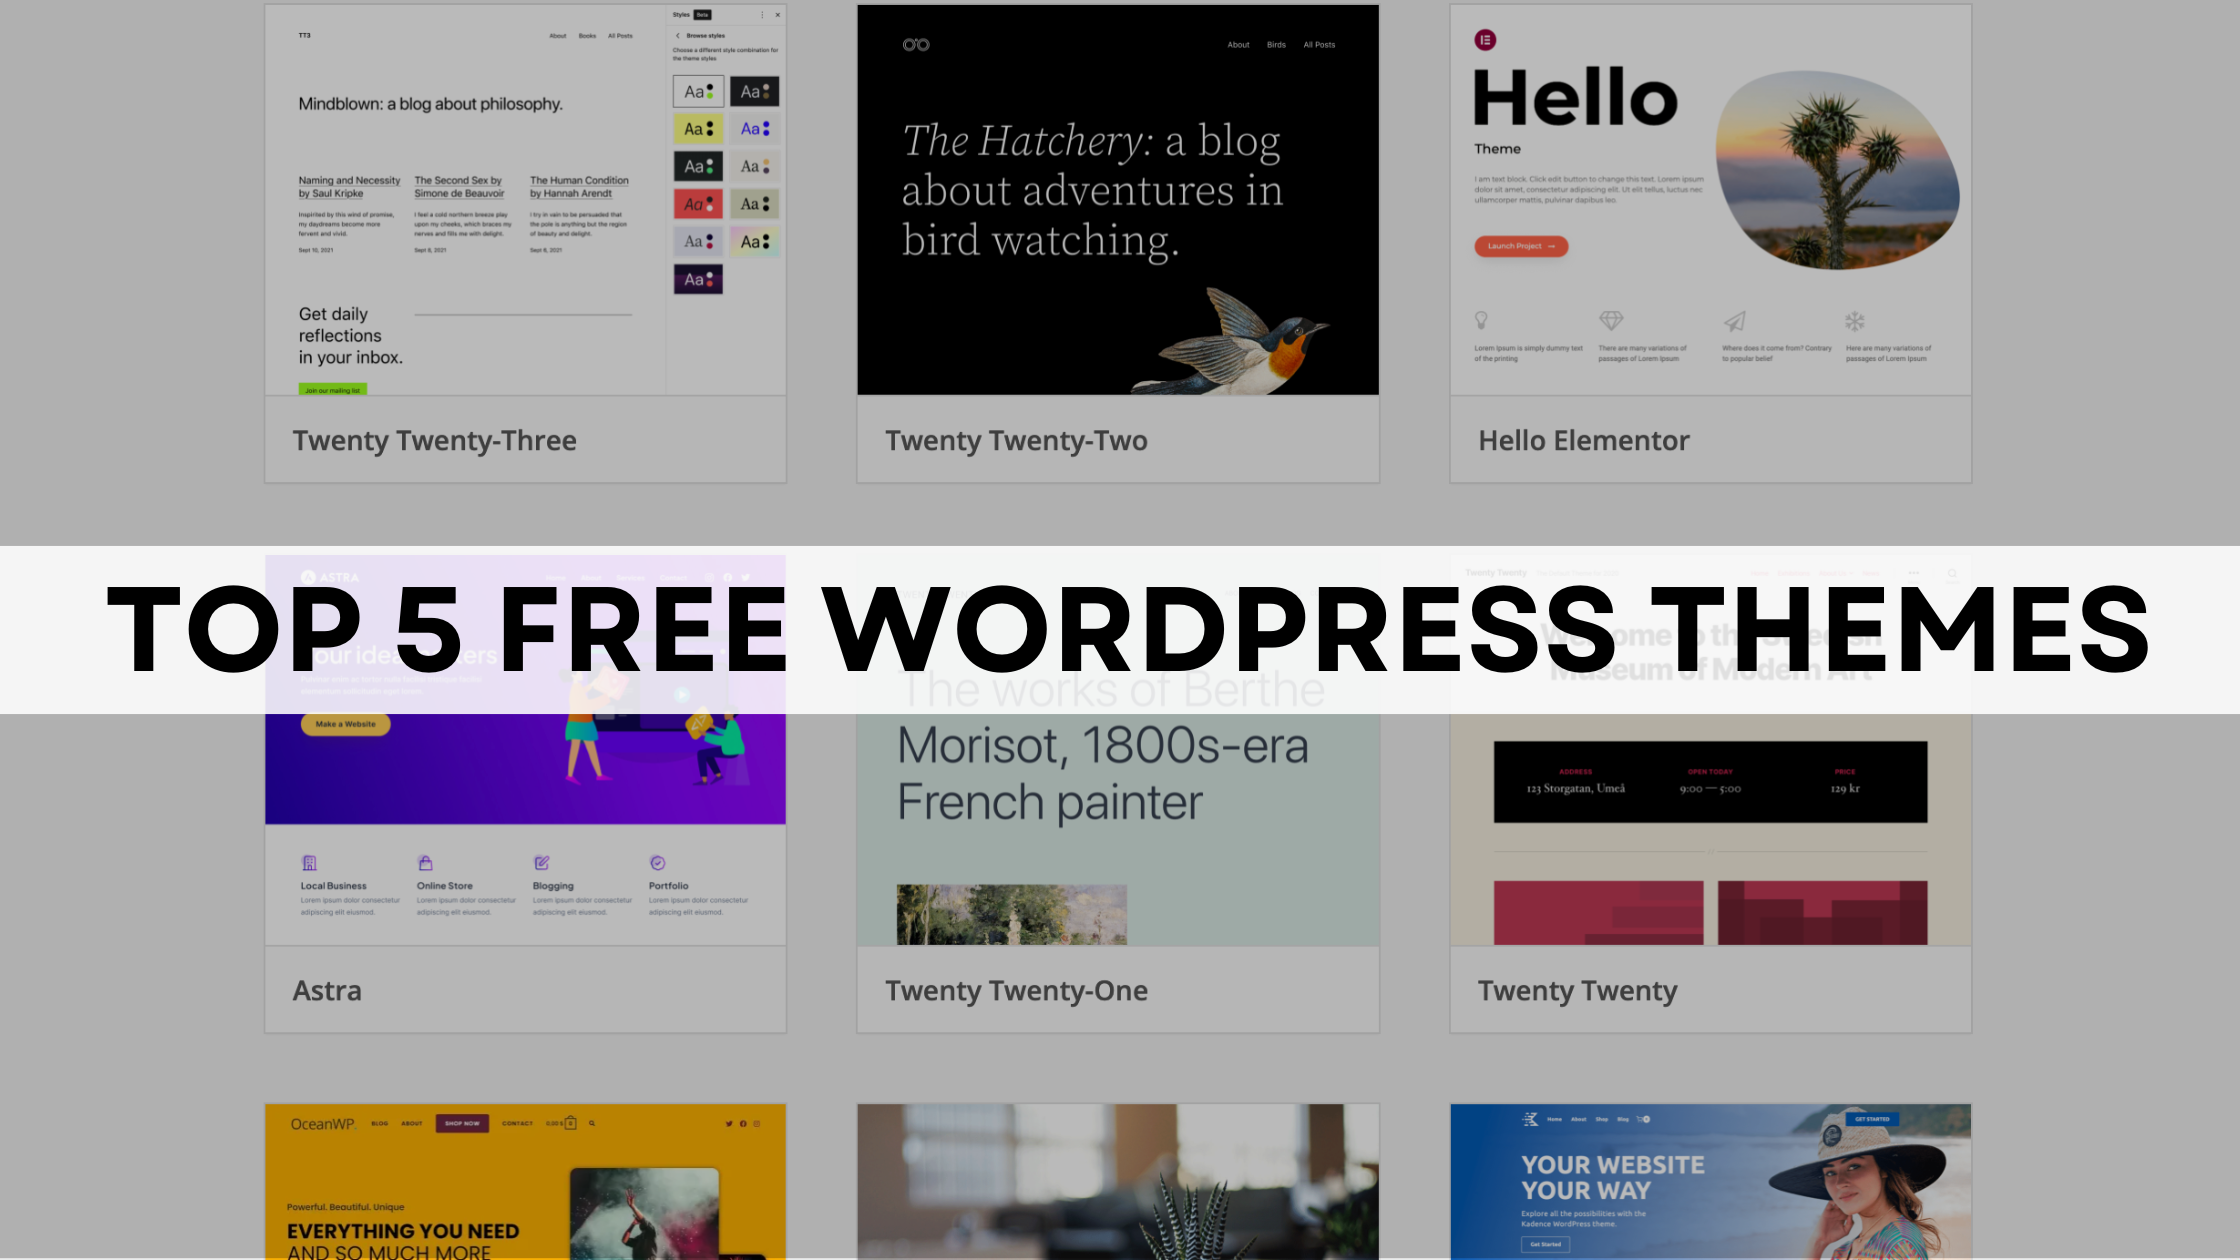 To 5 Free WordPress Themes for Any Website in 2023